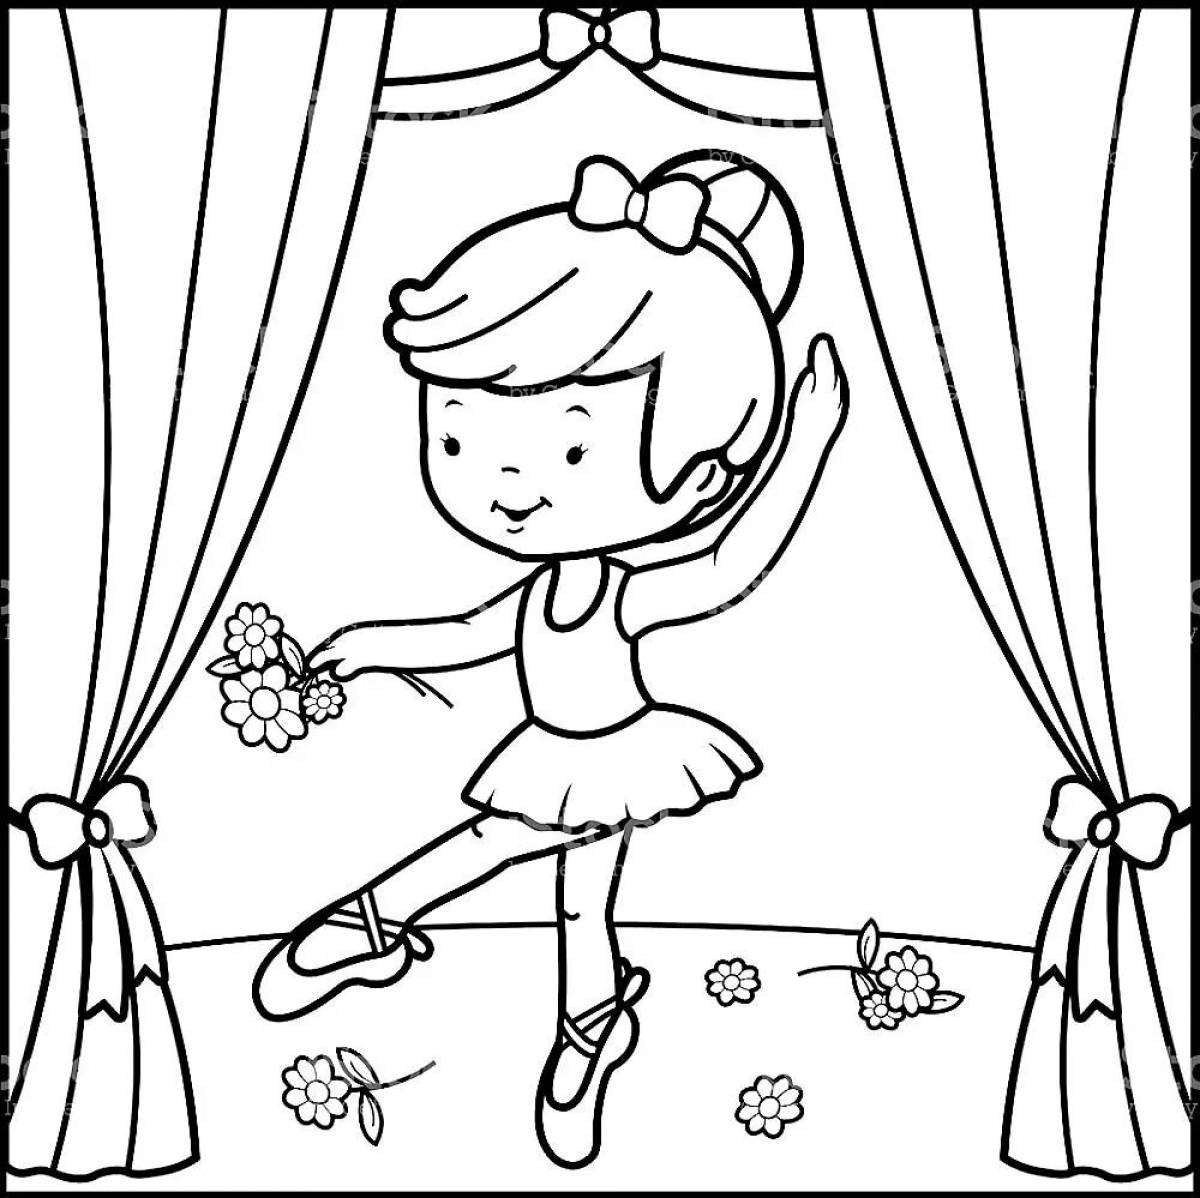 Coloring page shining puppet theater